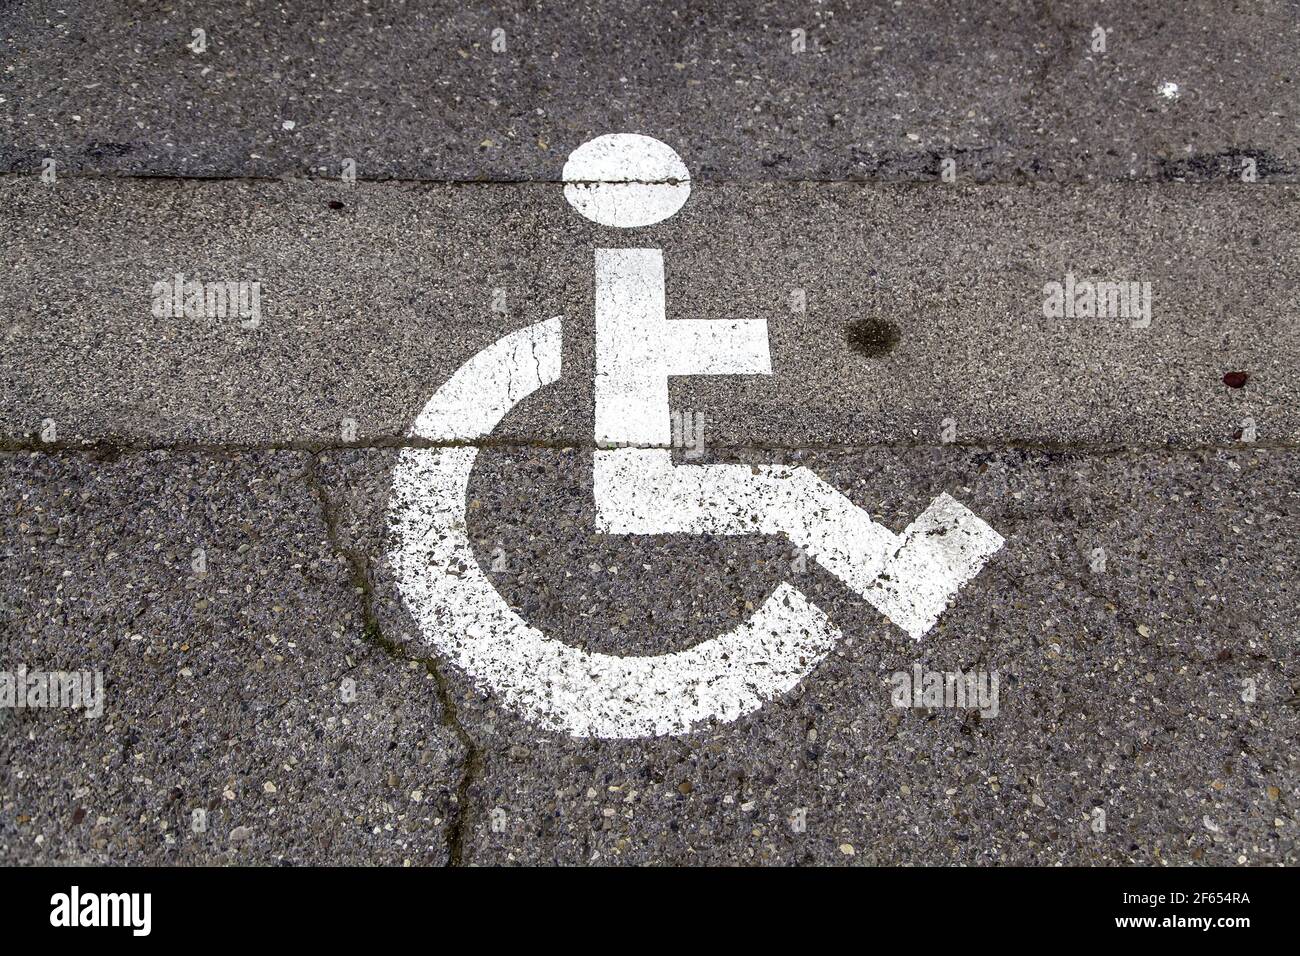 Disabled parking sign, road traffic signs Stock Photo